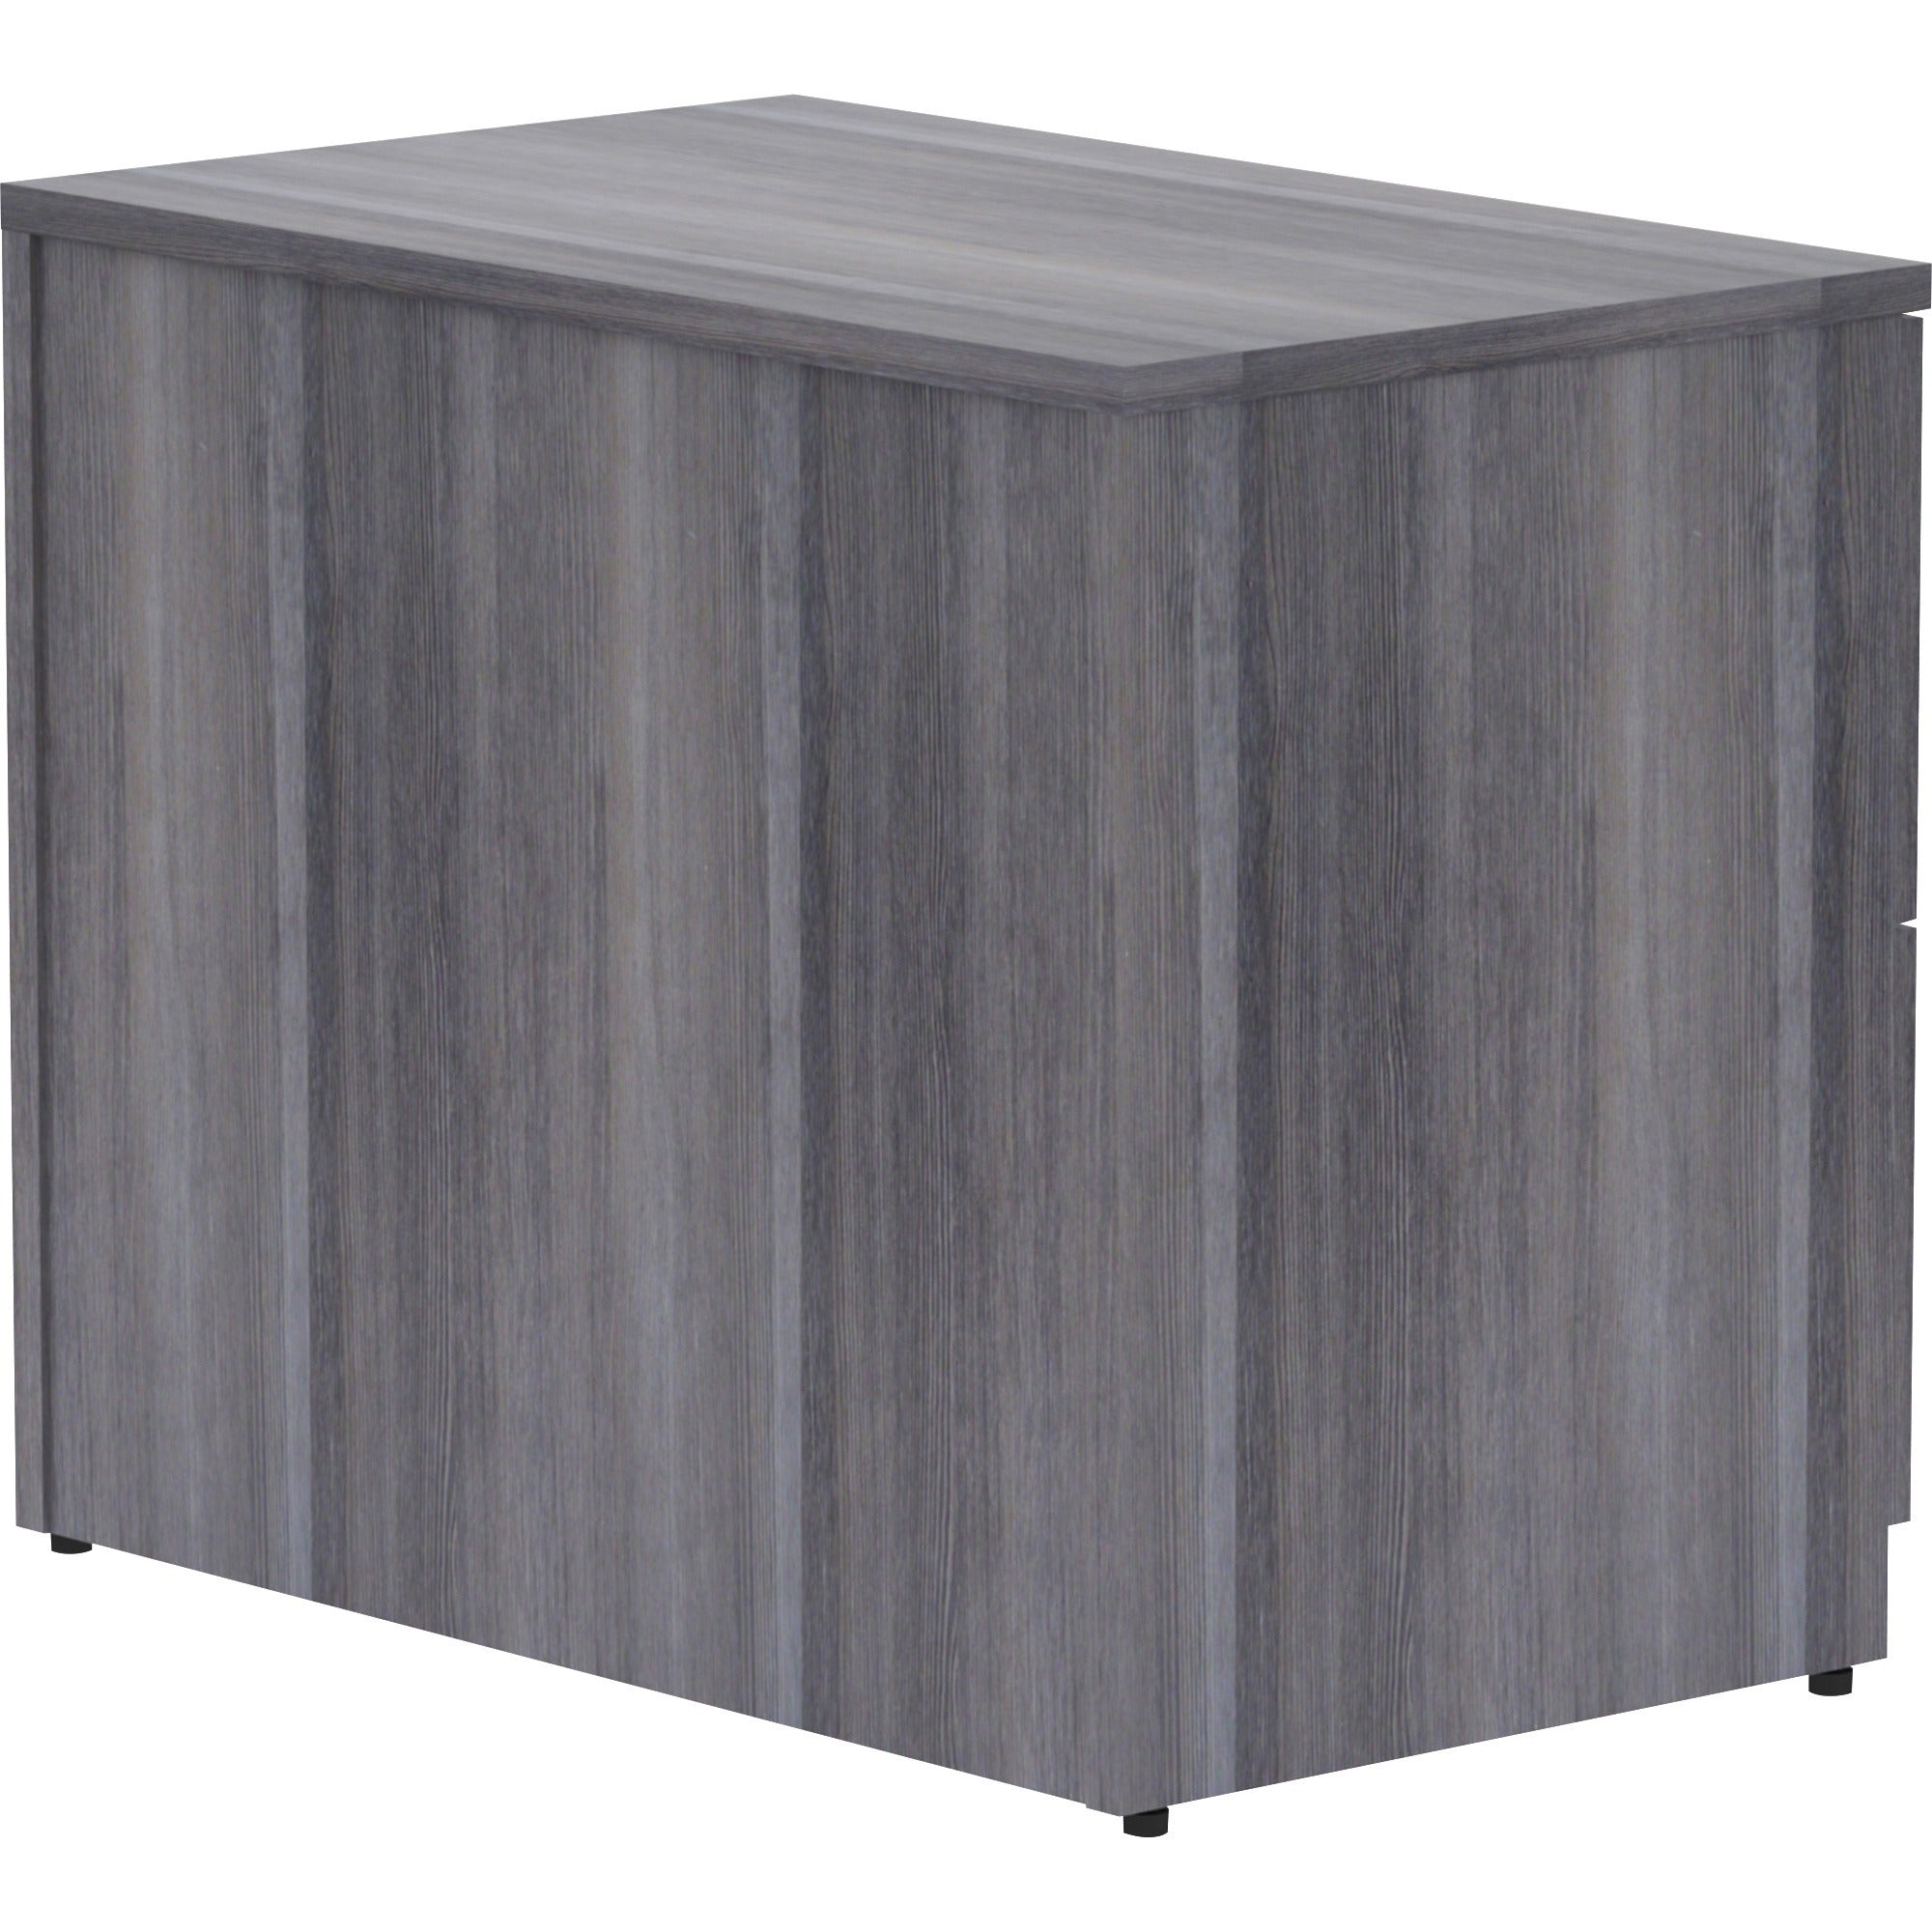 lorell-essentials-series-lateral-file-35-x-22295--1-top-2-x-file-drawers-finish-weathered-charcoal-laminate_llr69563 - 4